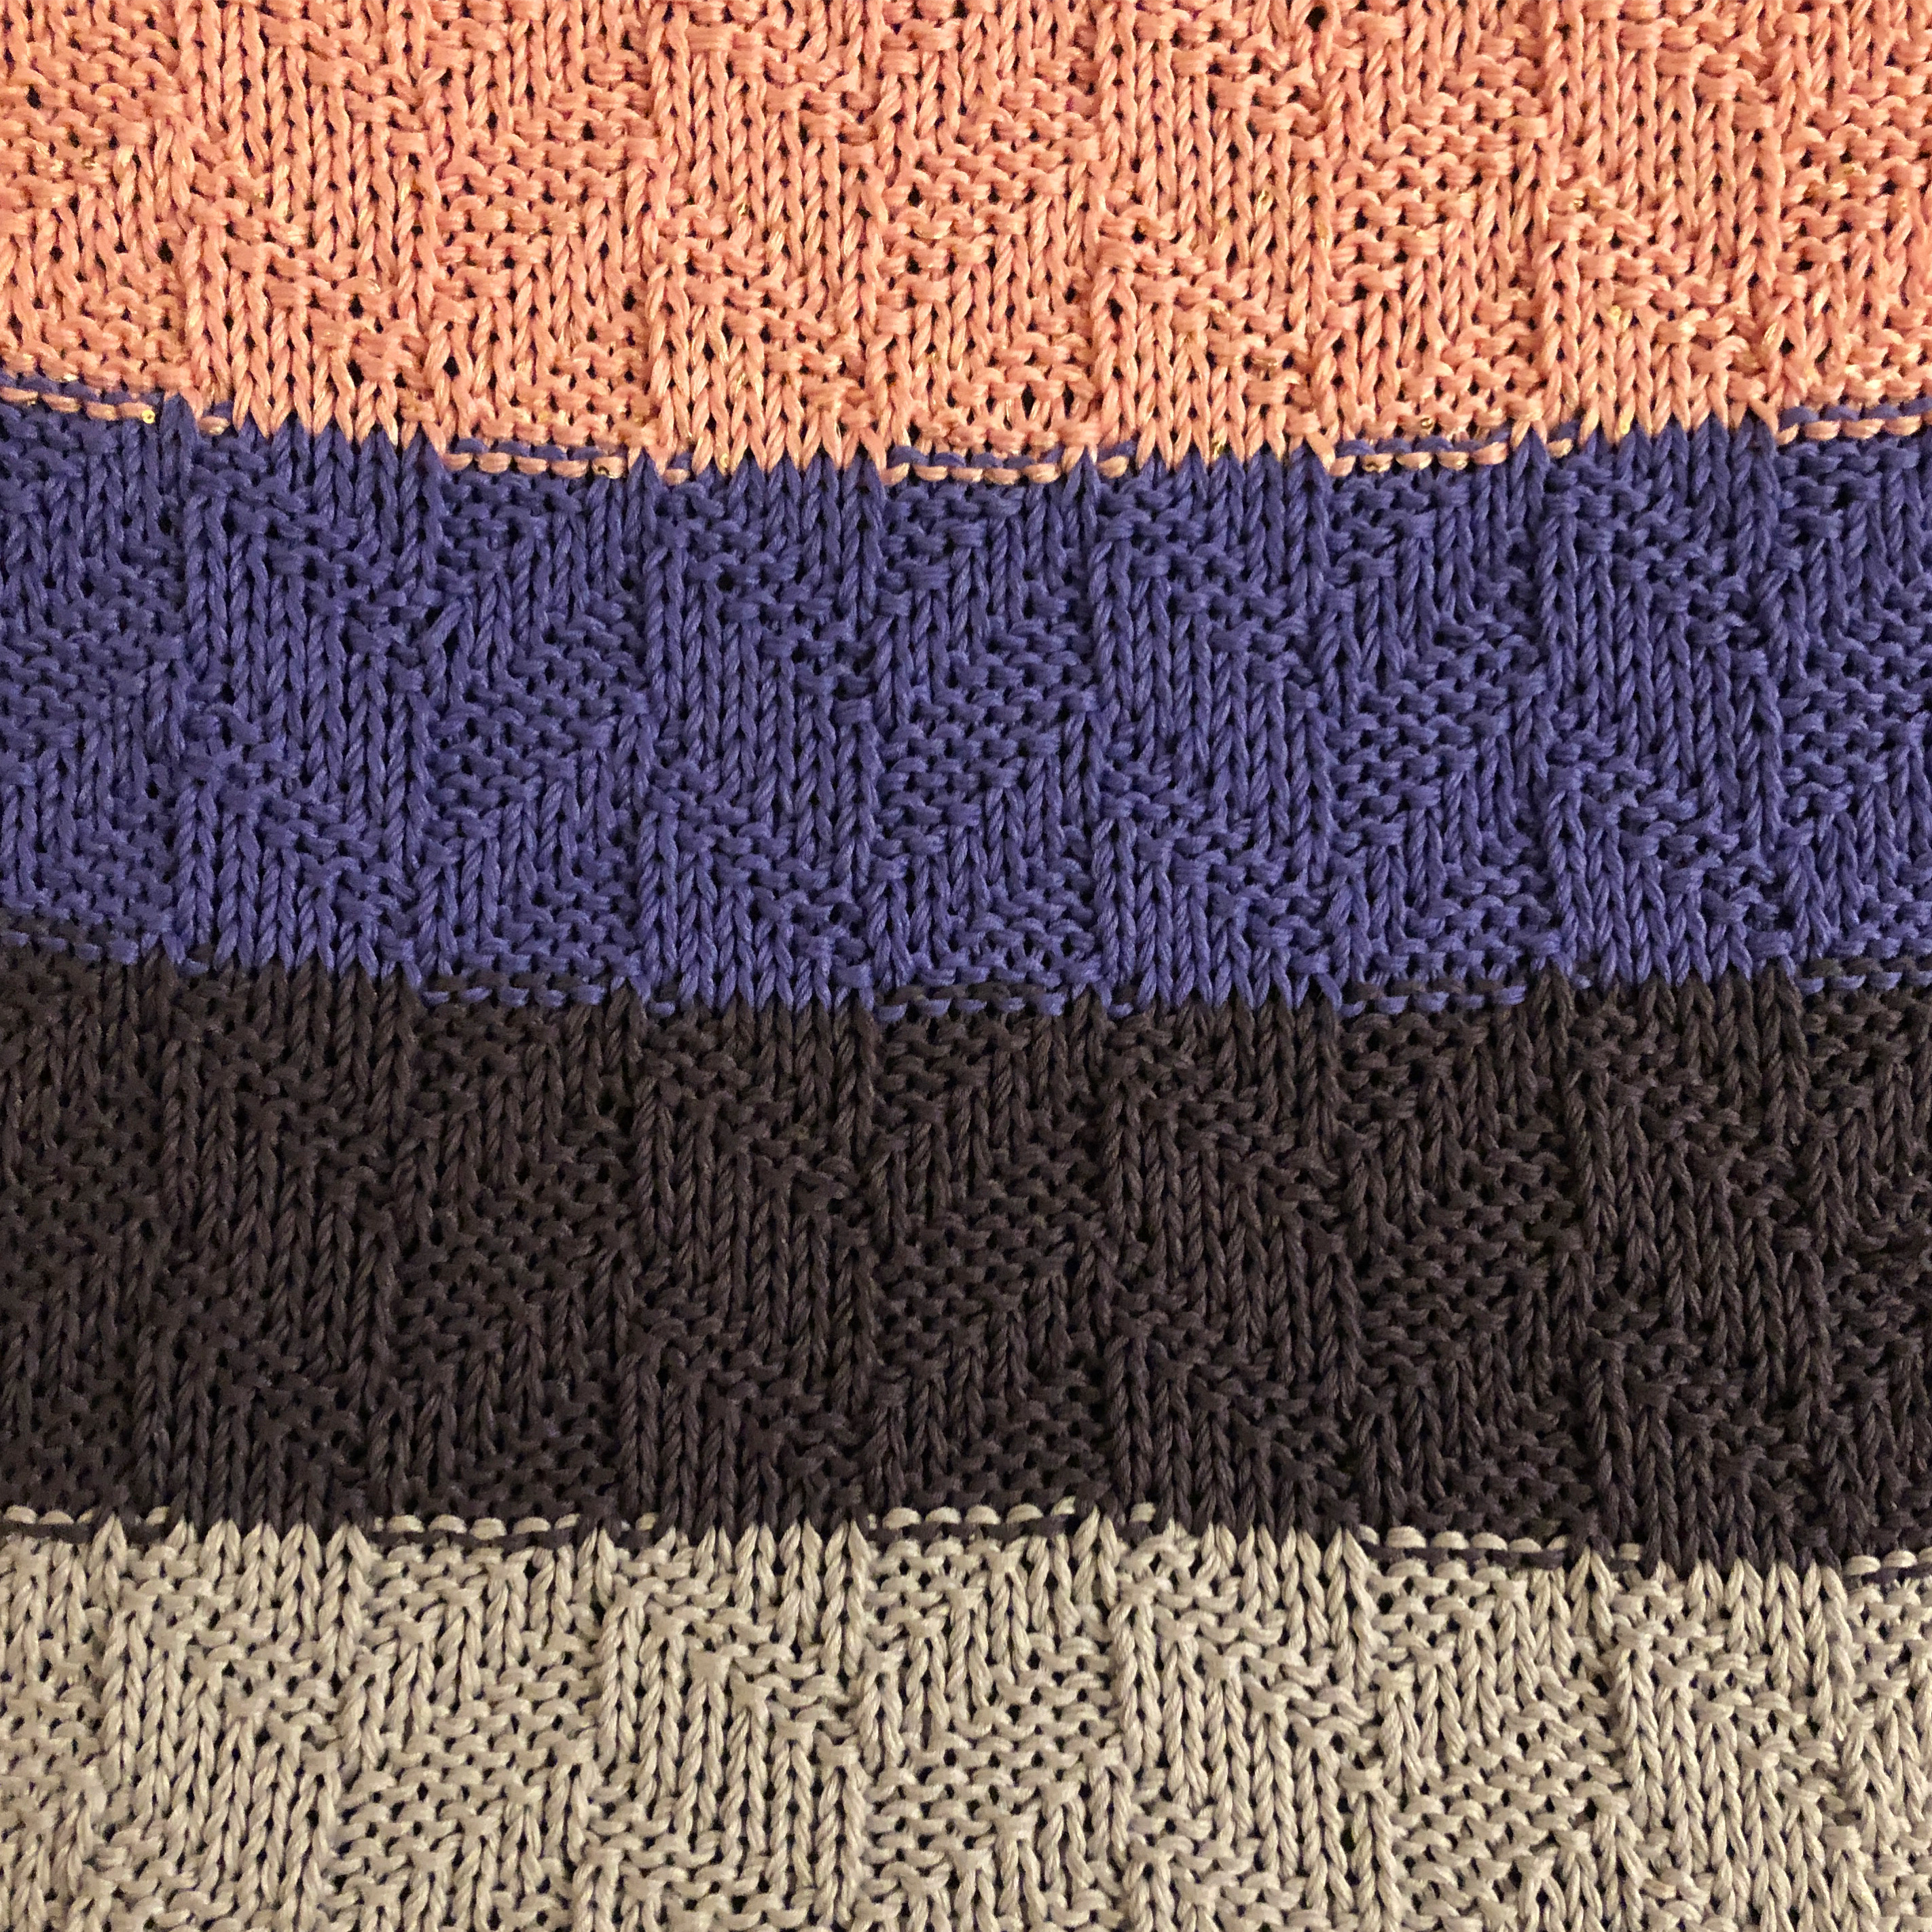 a close-up of a textured knitting stitch on a baby blanket